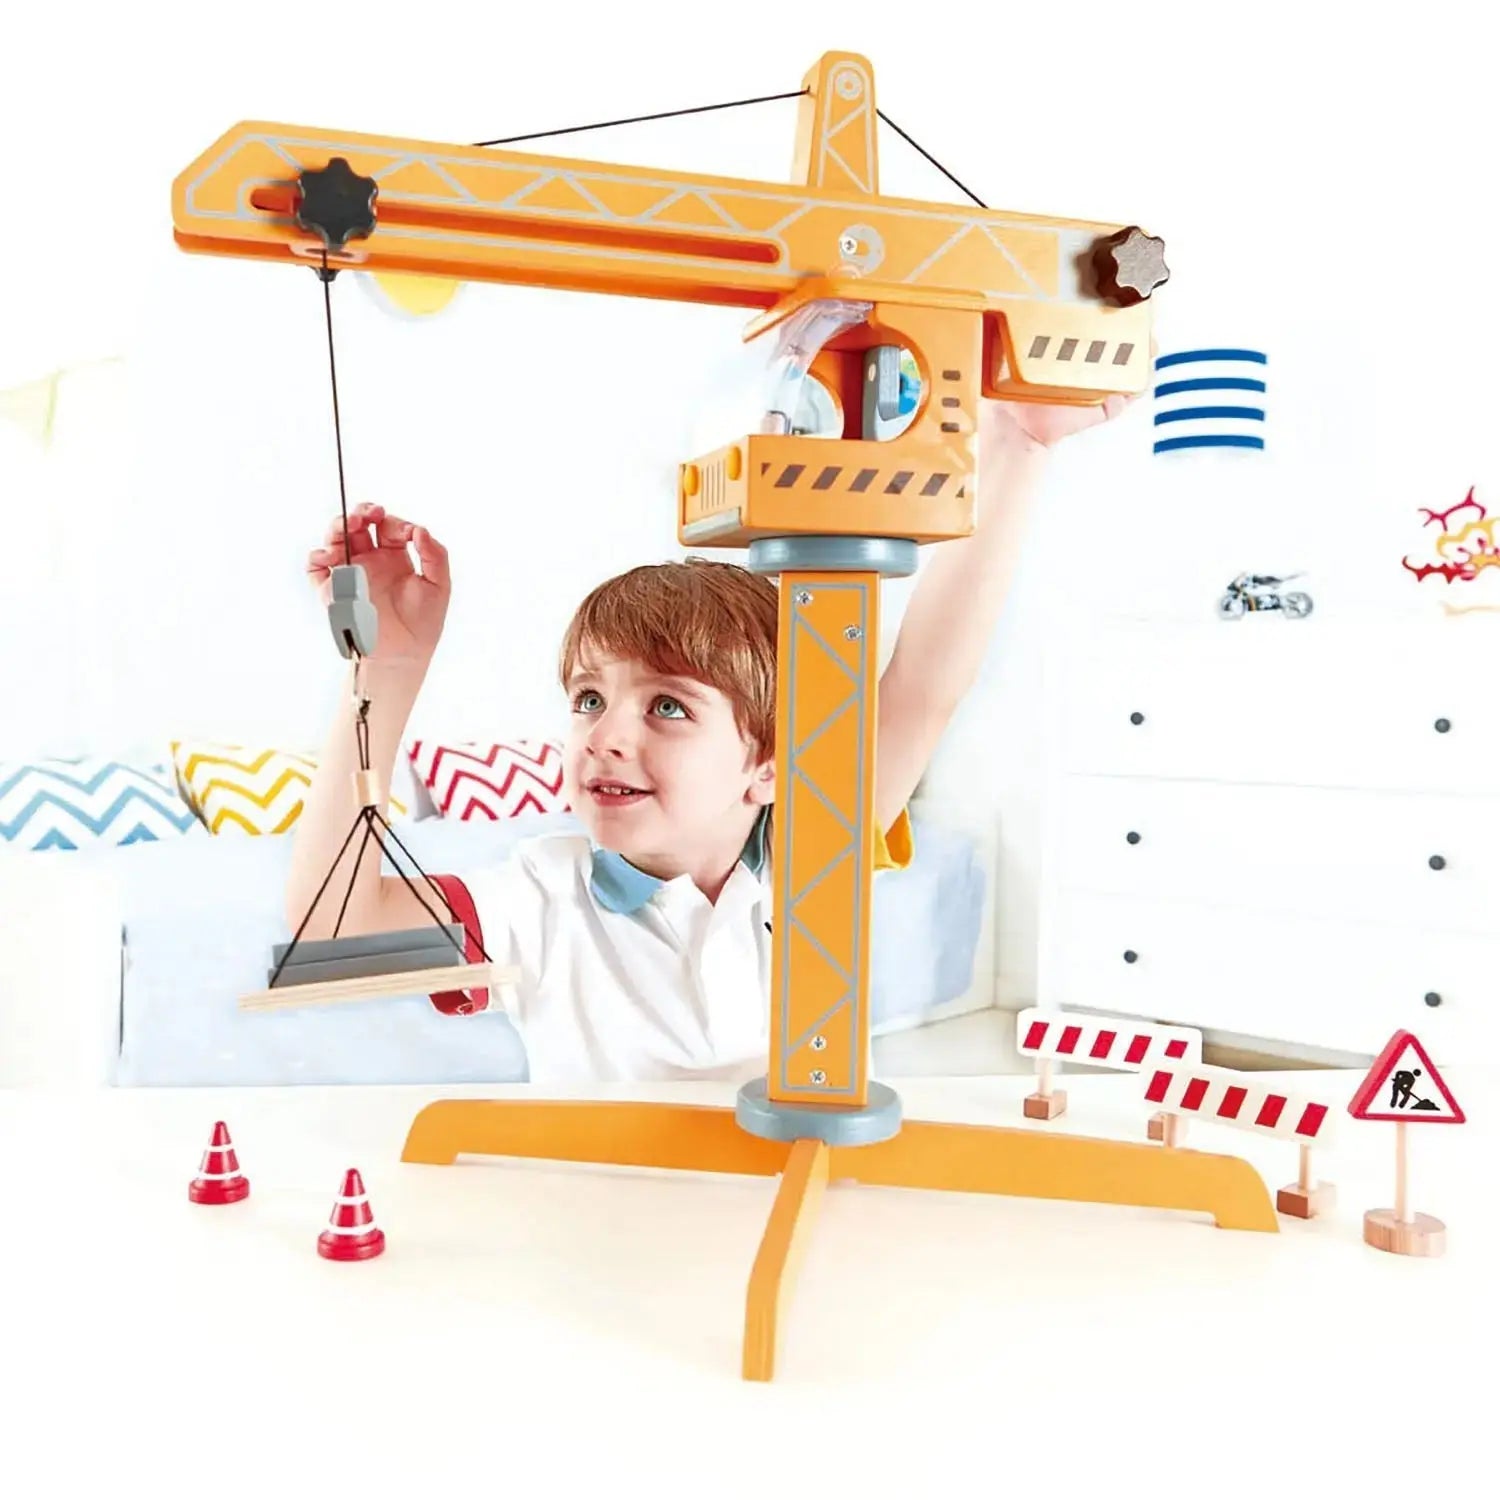 Hape Playscapes Toddler Kids Wooden Toy Construction Site Crane Lift Play Set